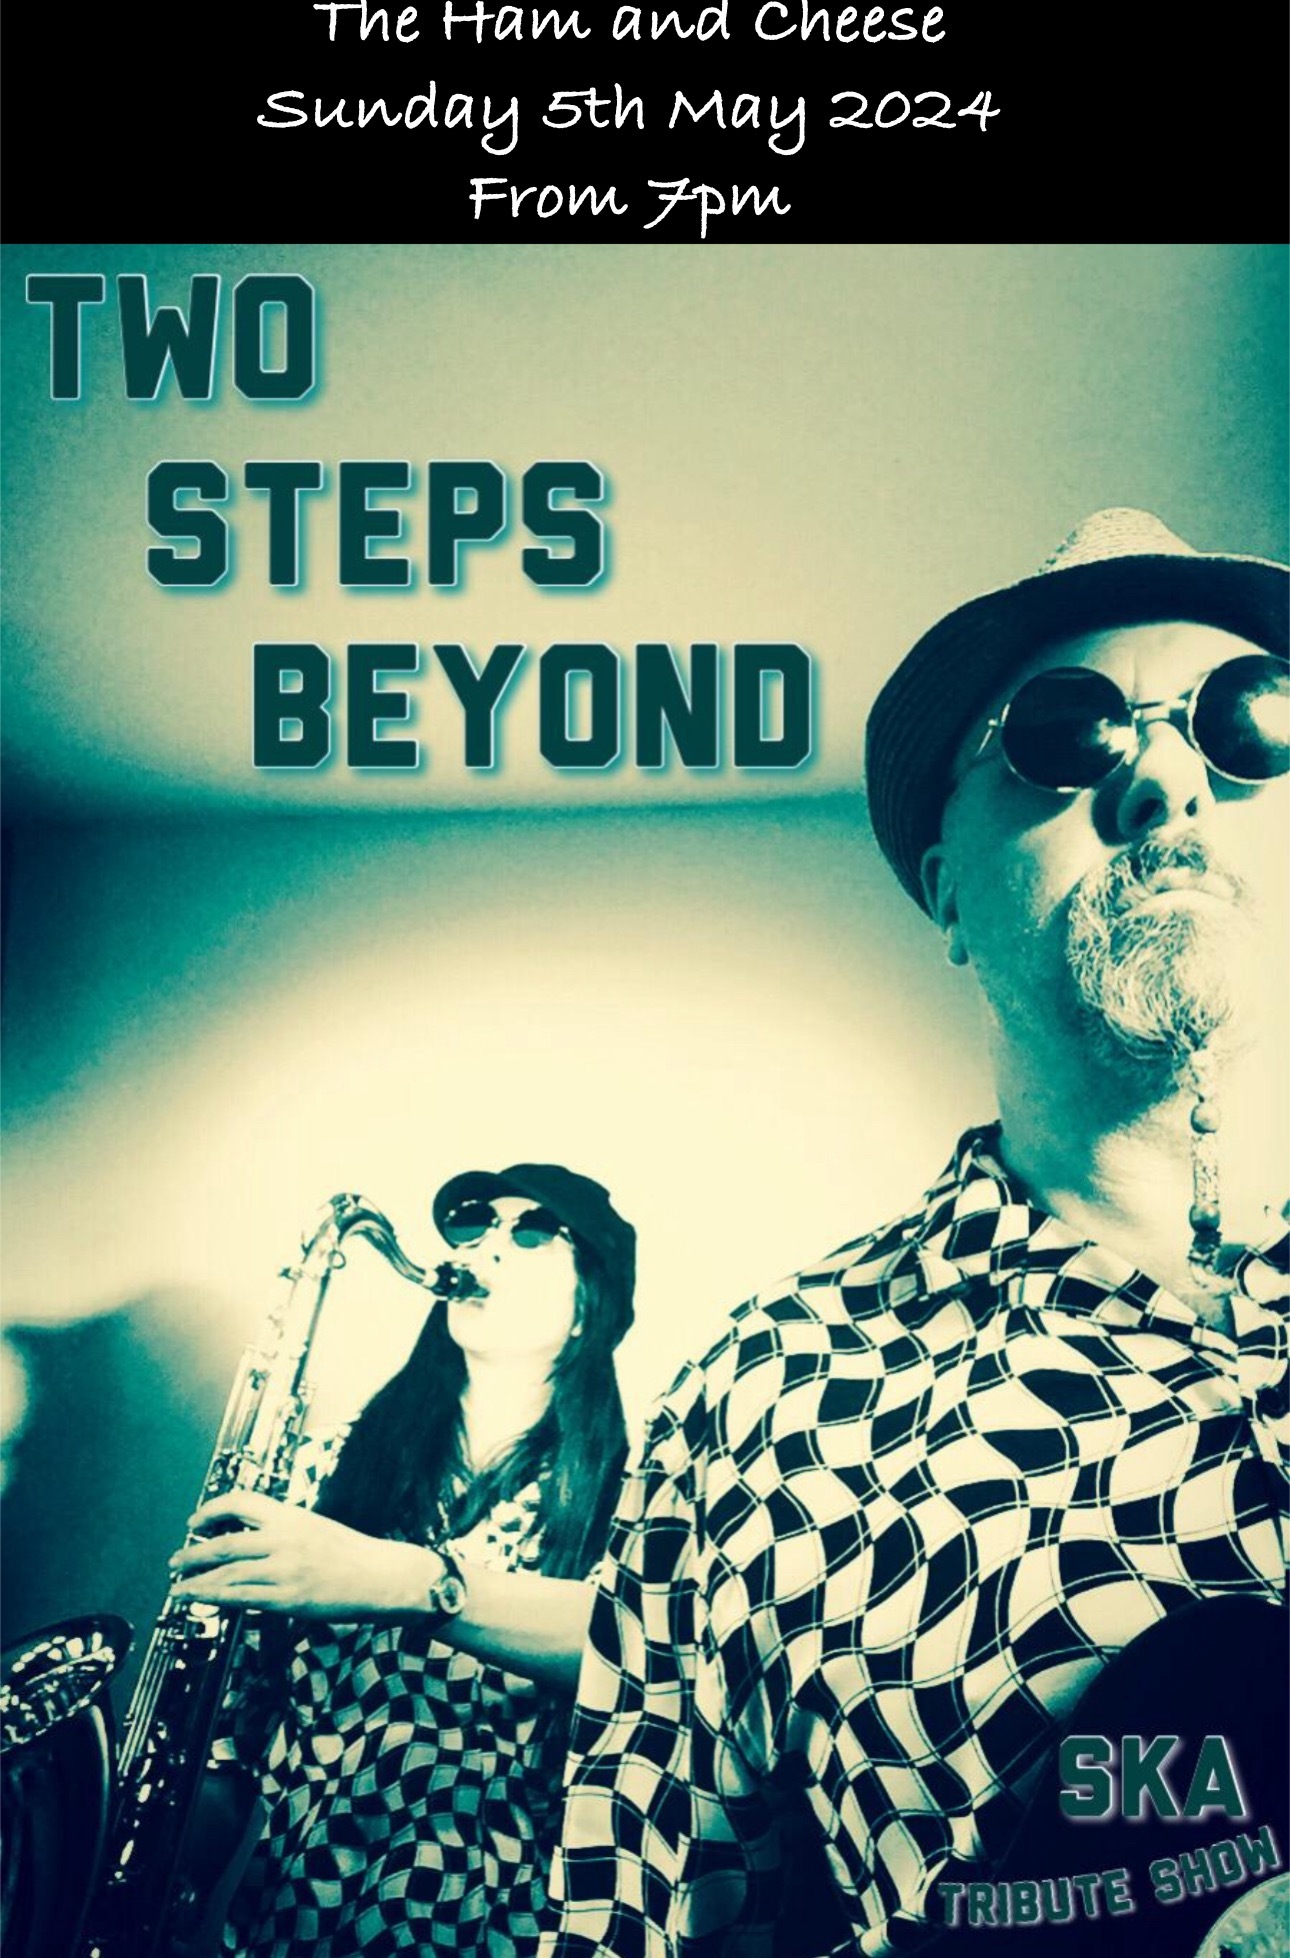 Sunday 5th May 2024 -Two Steps Beyond